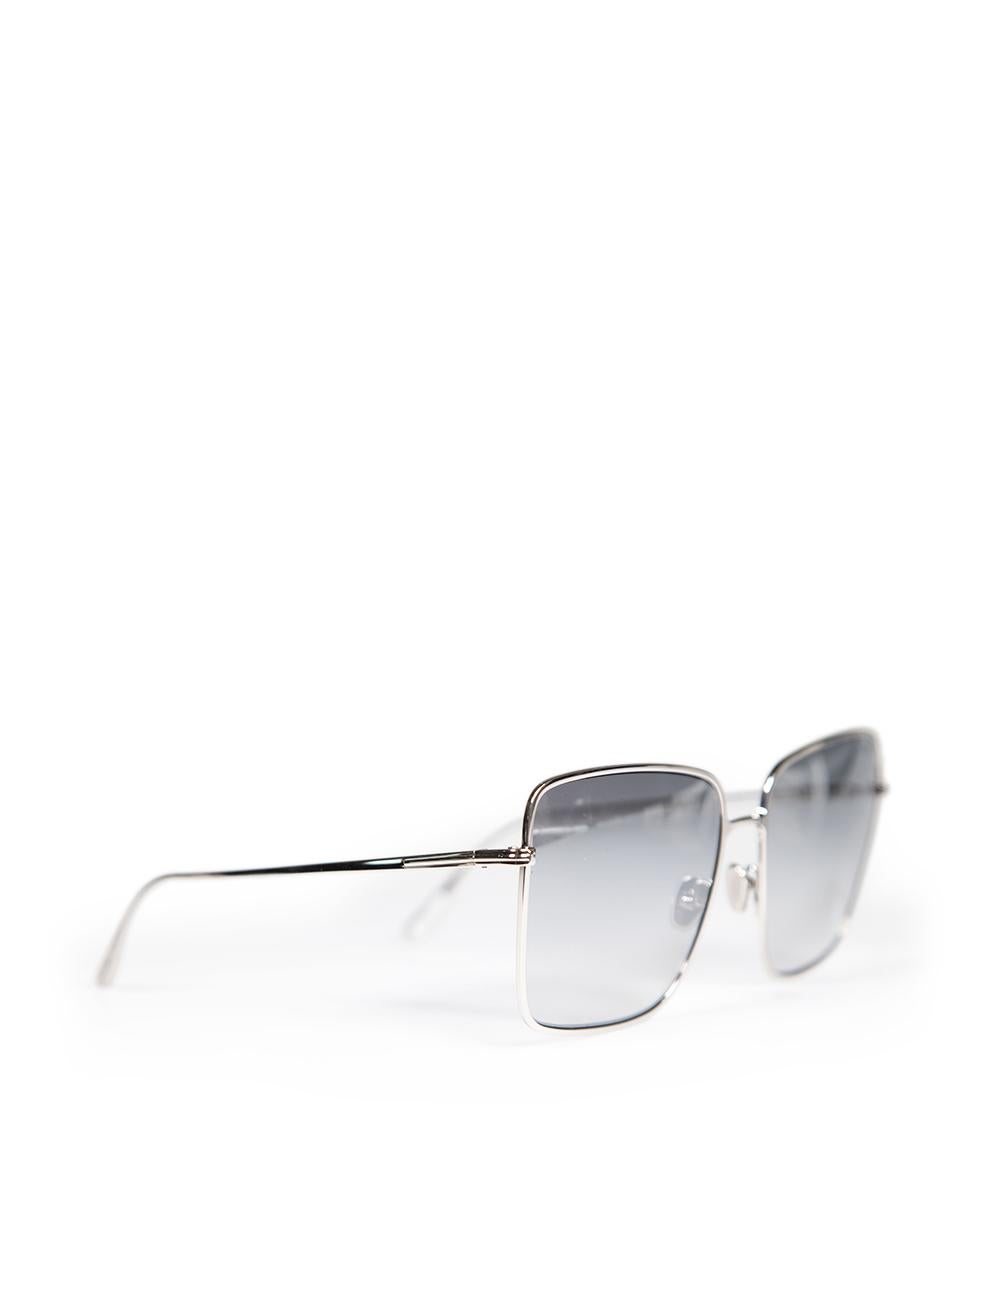 Tom Ford Heather Grey Smoke Square Sunglasses In New Condition For Sale In London, GB